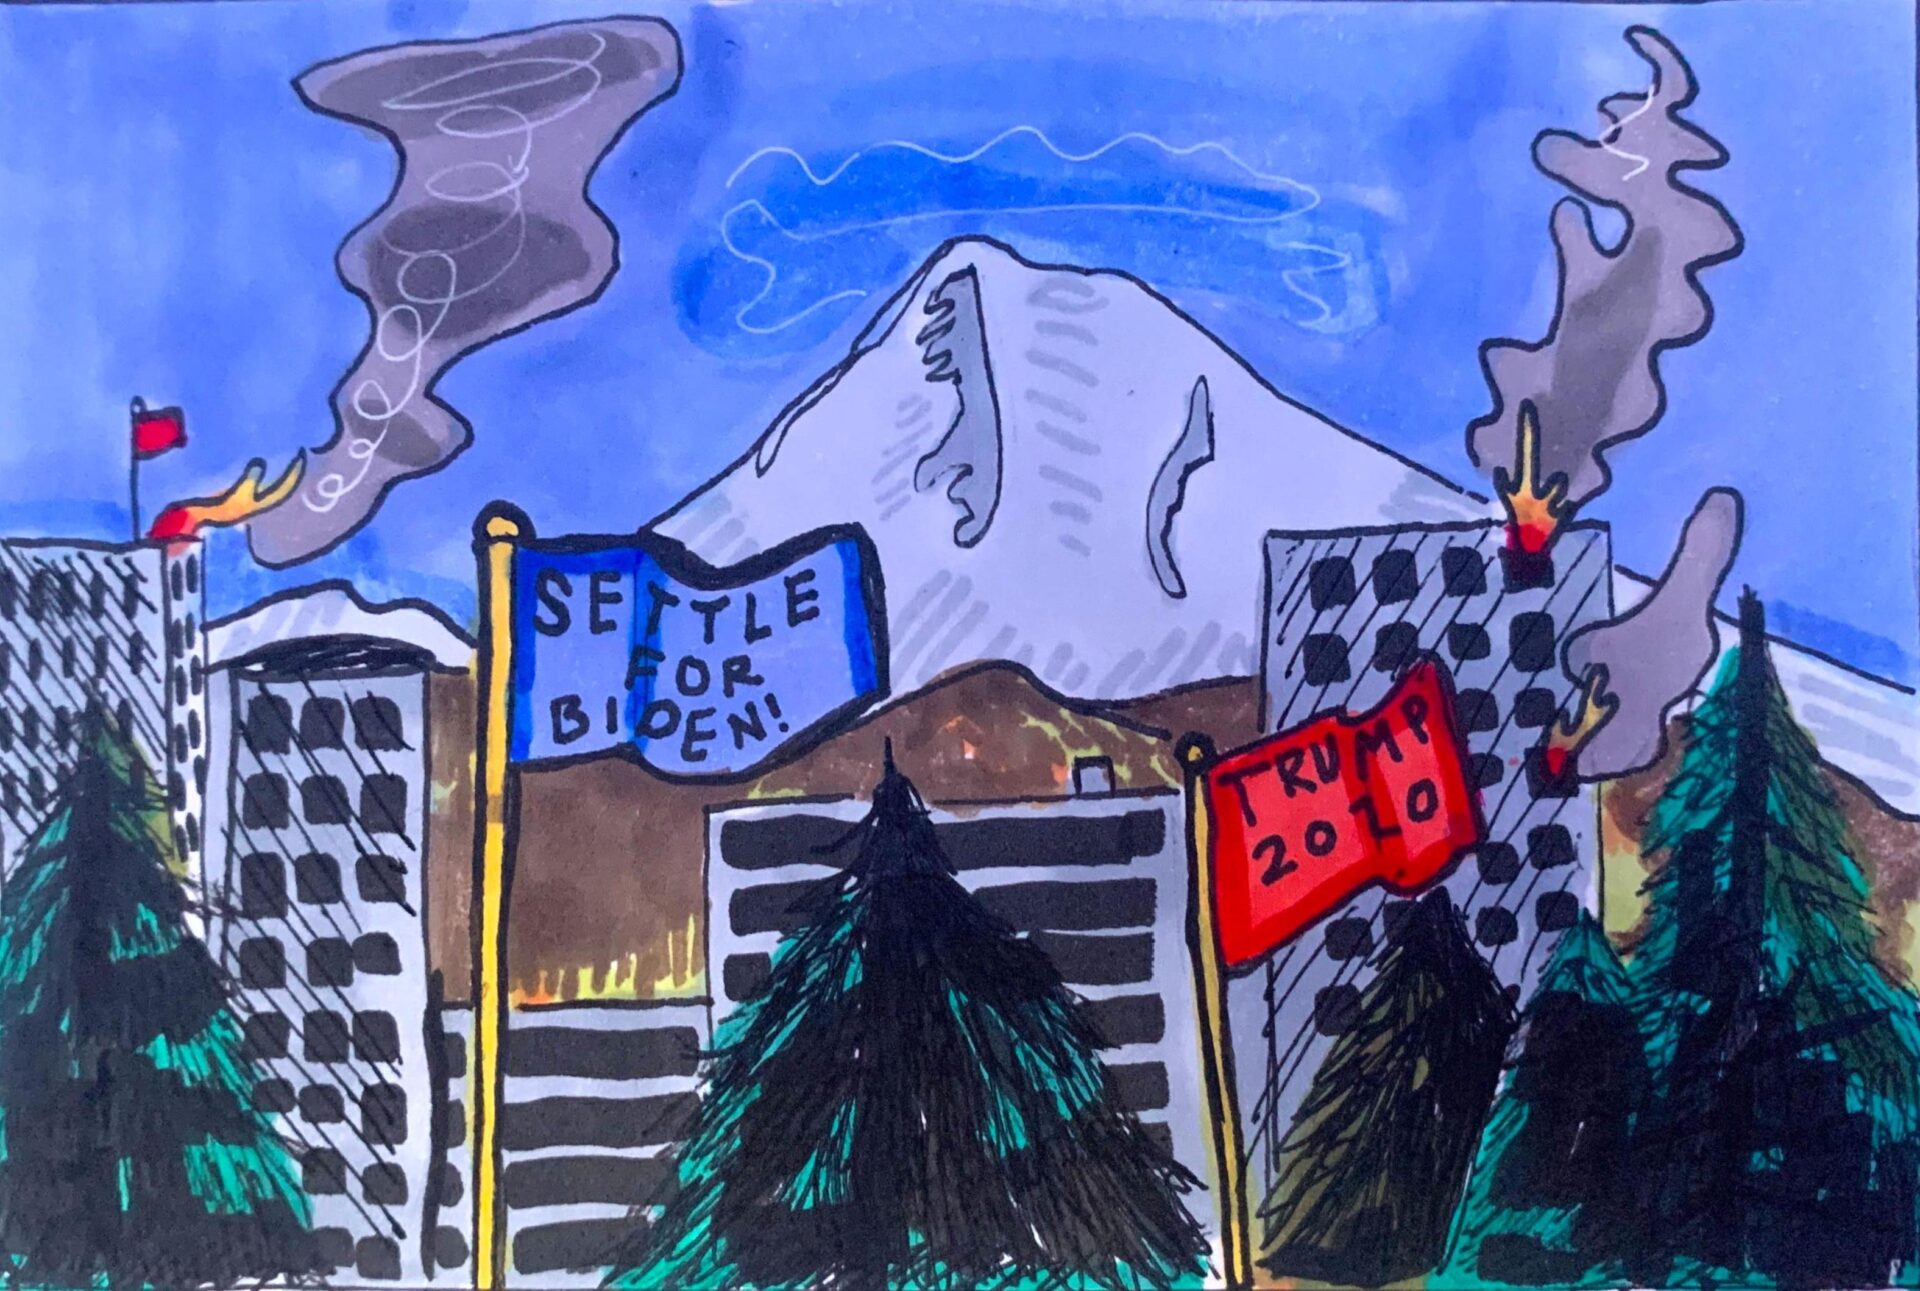 A hand drawn illustration with the city of Portland (trees and mountains) and two different flags: one is blue and says "Settle for Biden!" and the other is red with "Trump 2020" on it